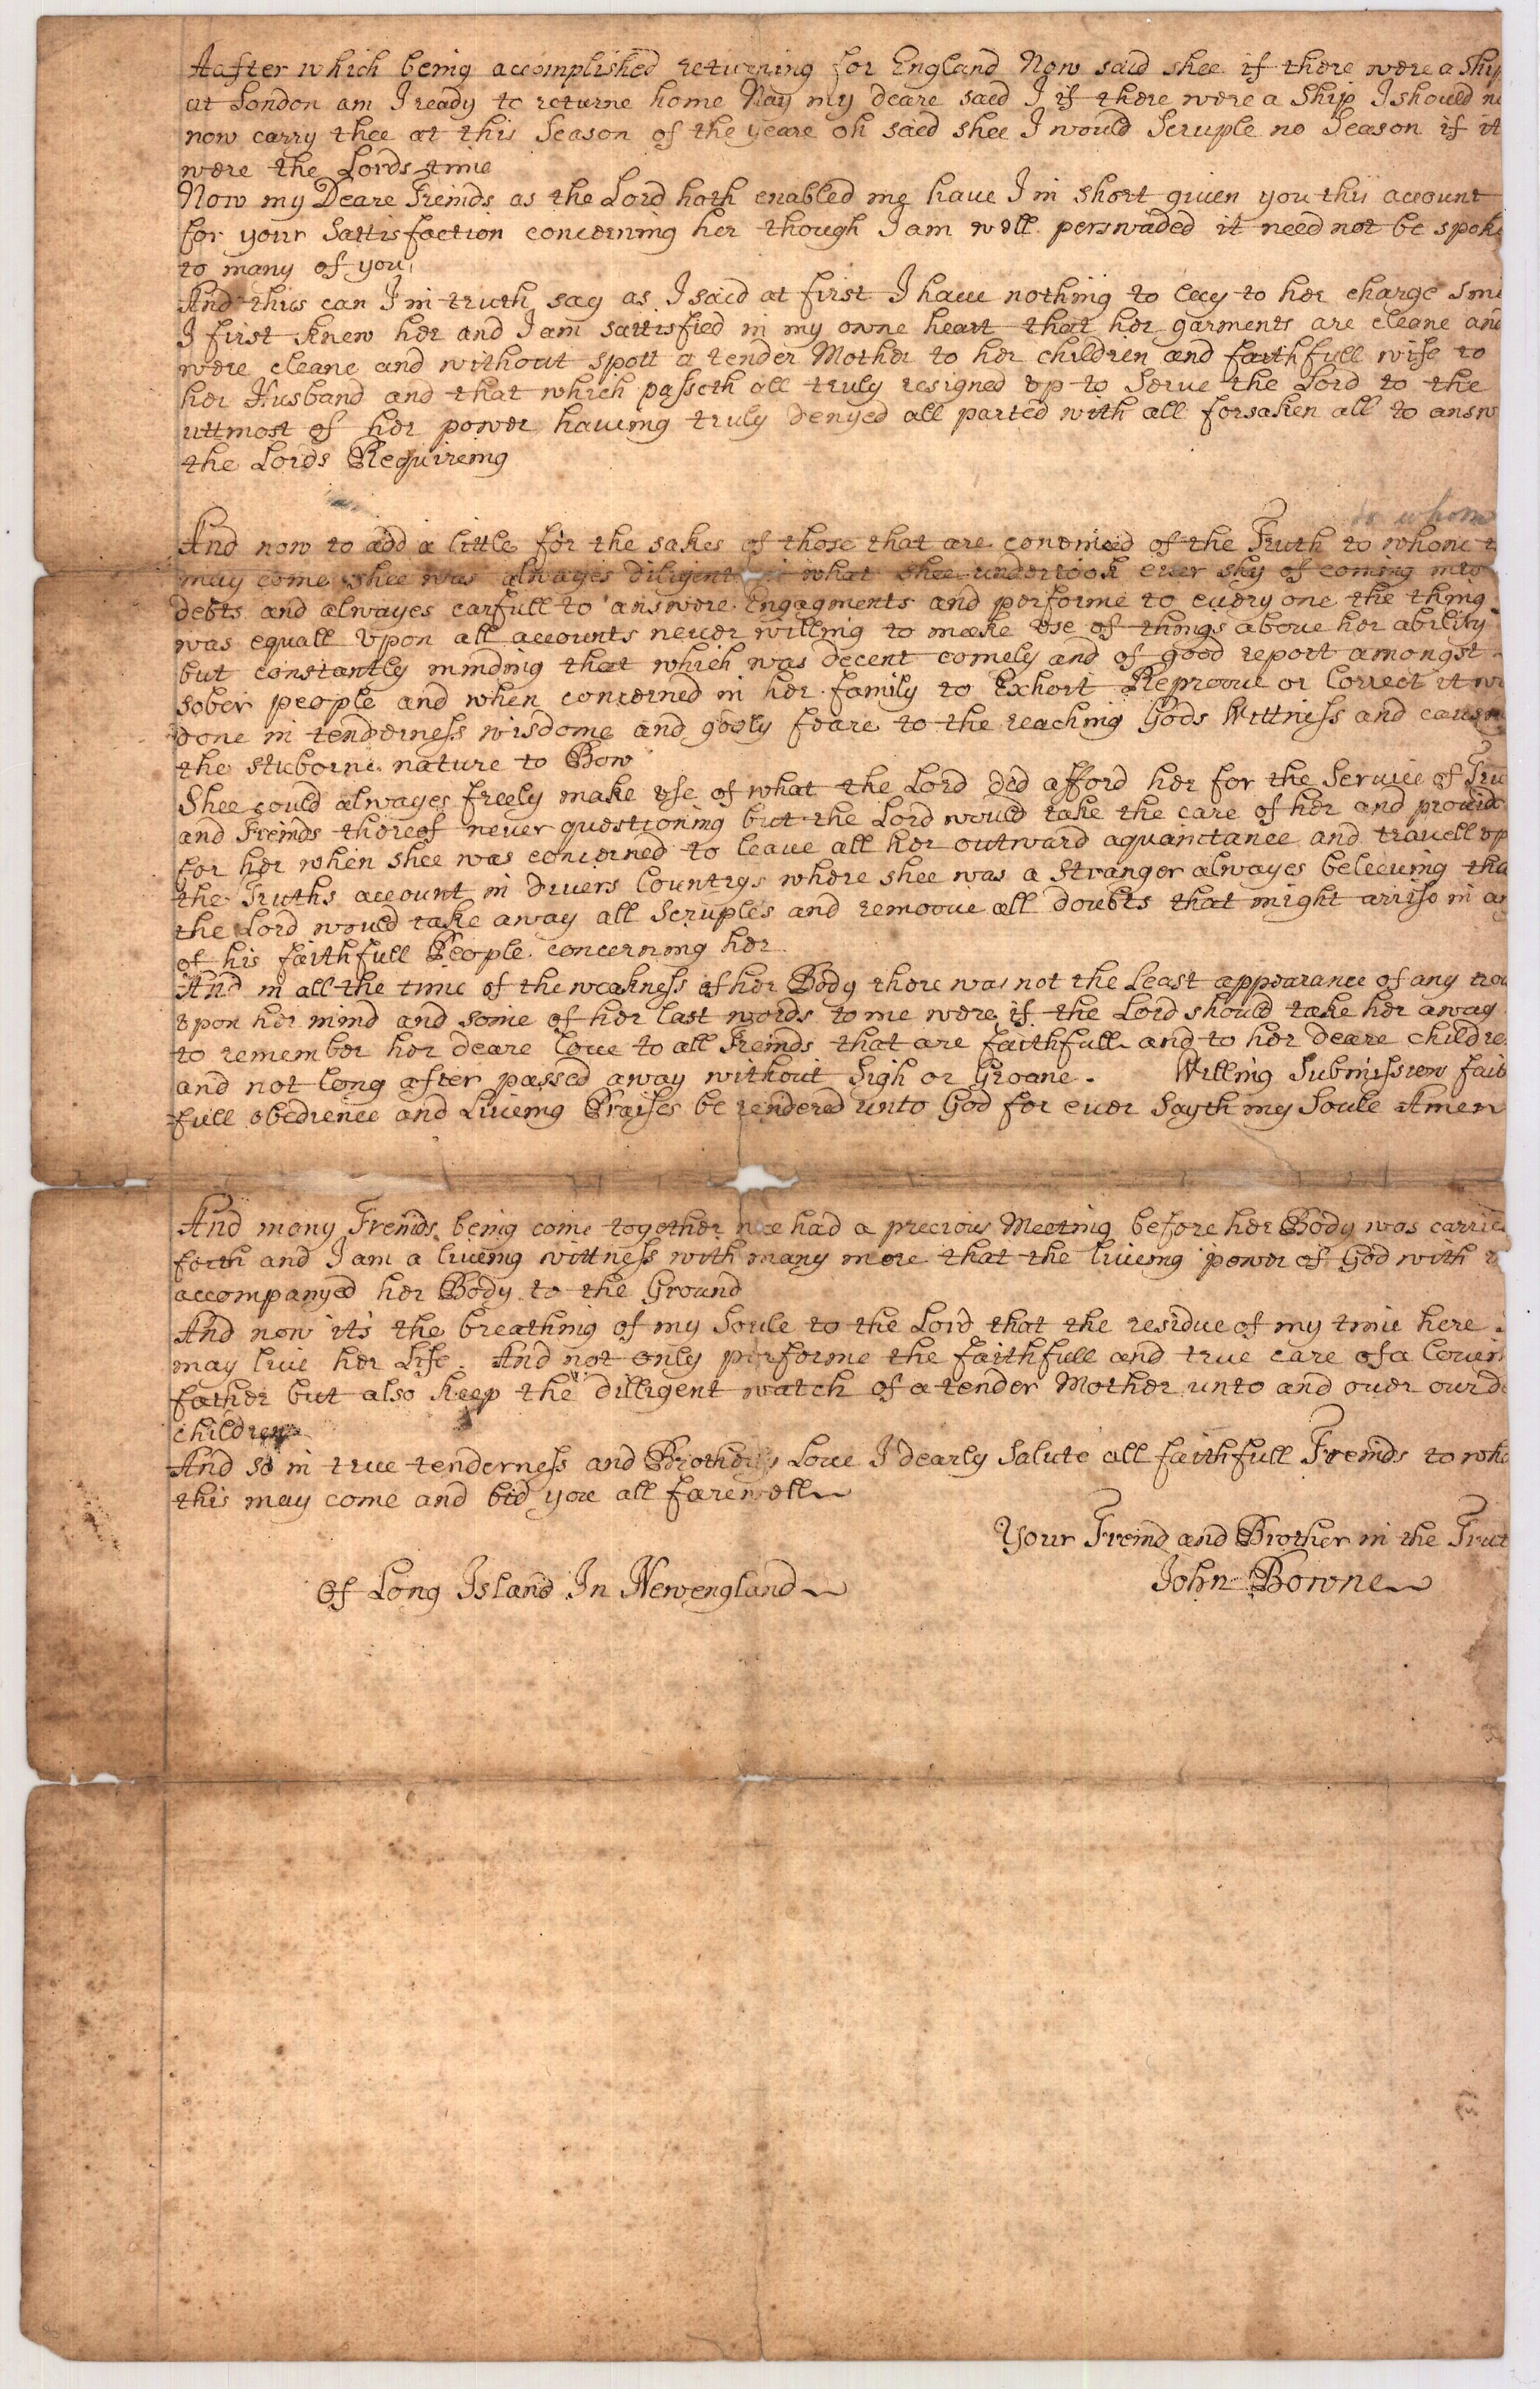 Testimony of John Bowne for Hannah Bowne, 1677/8 (page 2)